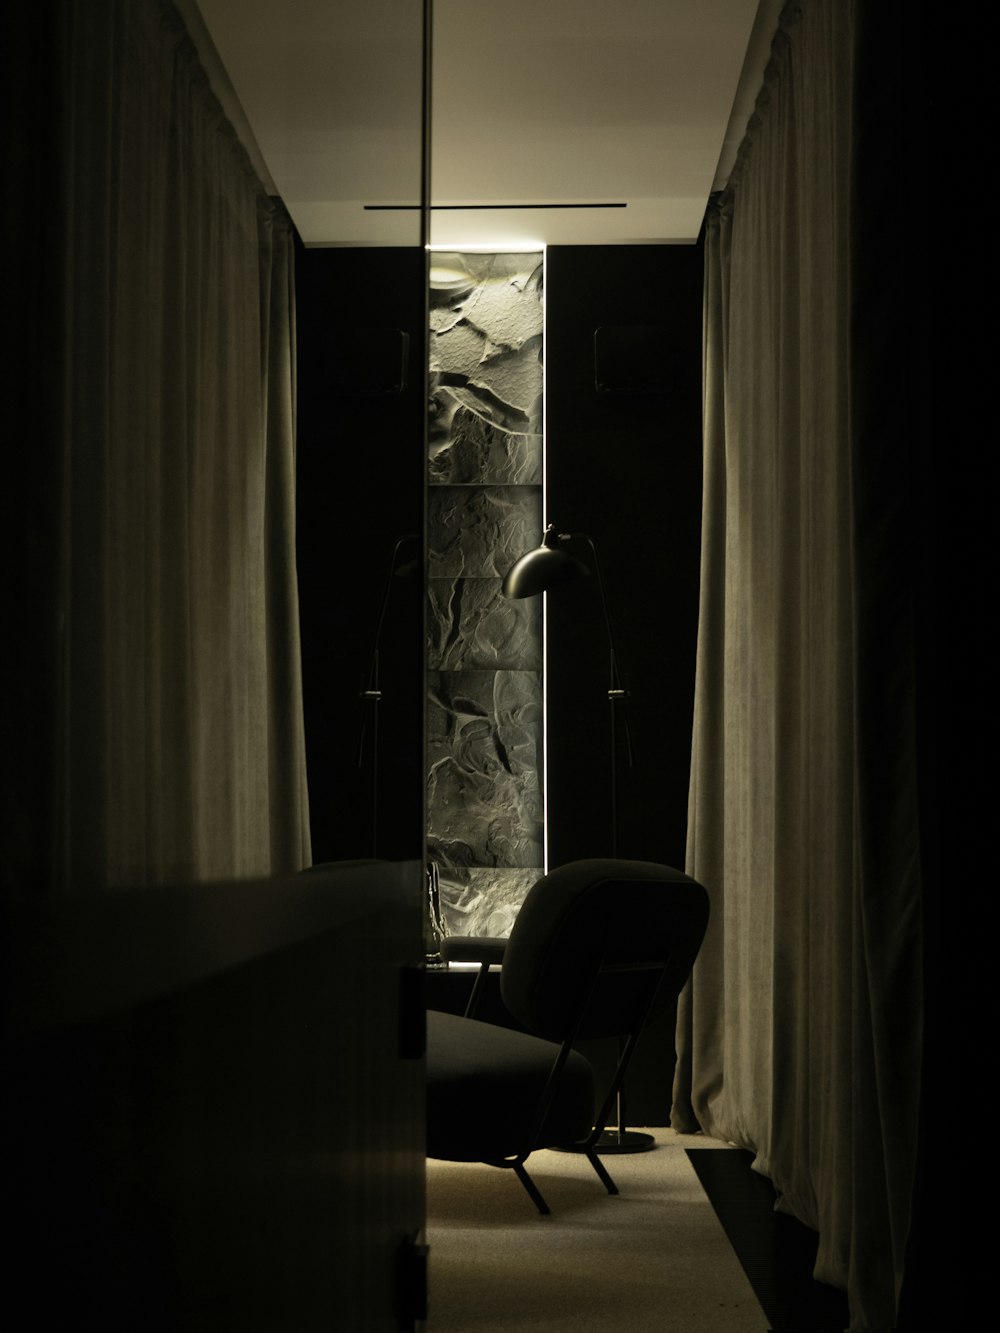 a black and white photo of a chair in a dark room